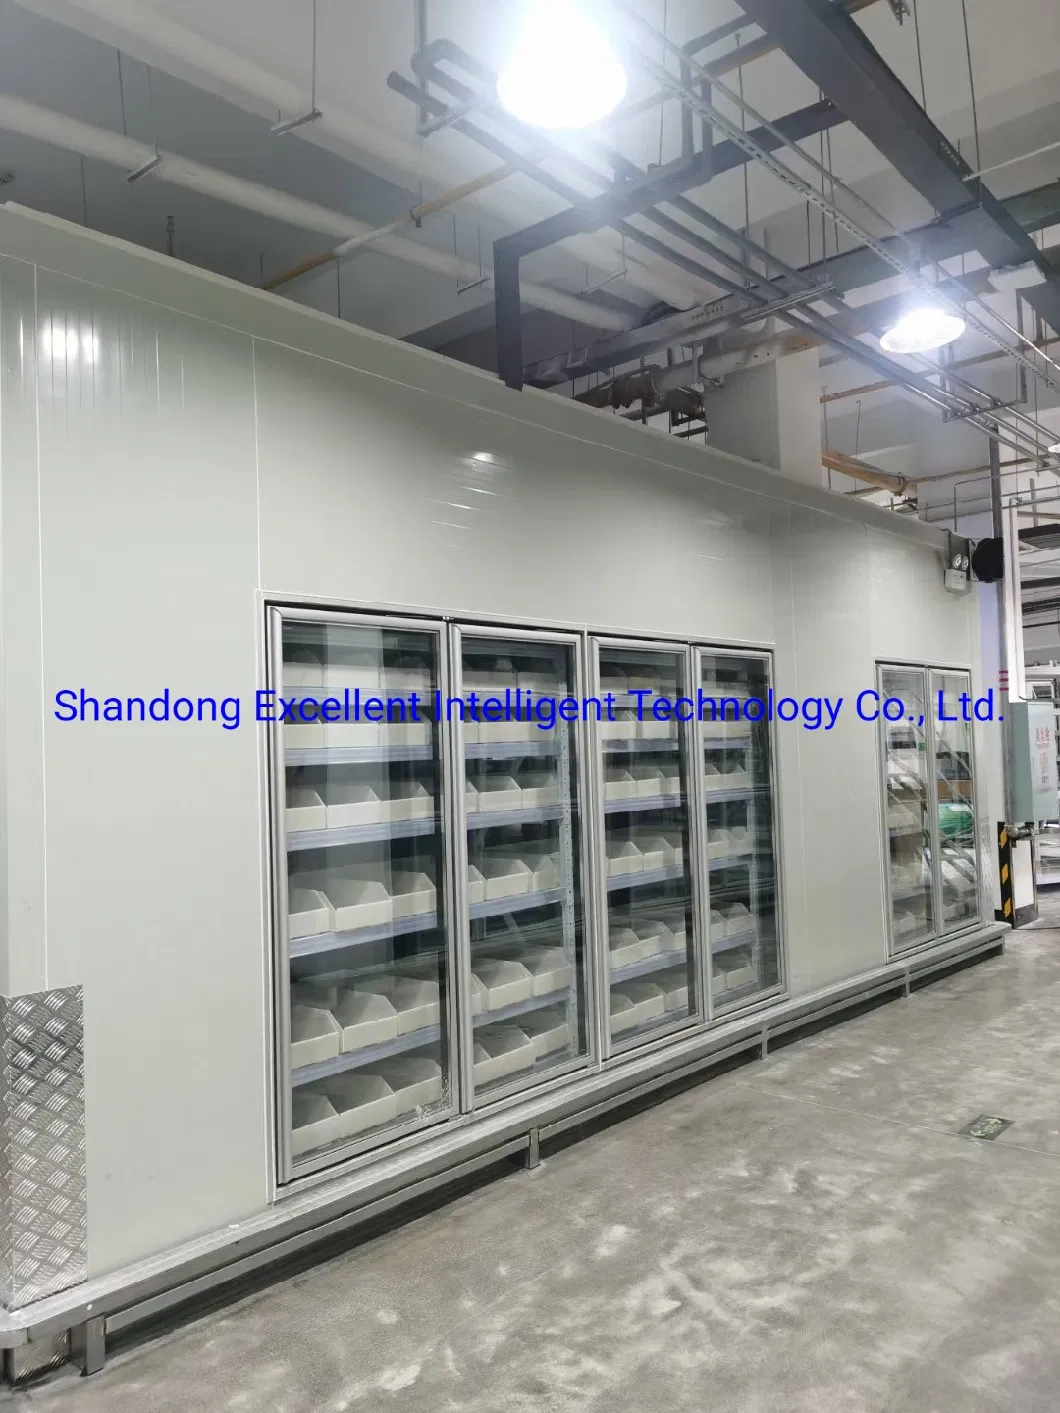 Customized Refrigeration Store Enters Refrigeration Room Freezer Fresh Fruits and Vegetables